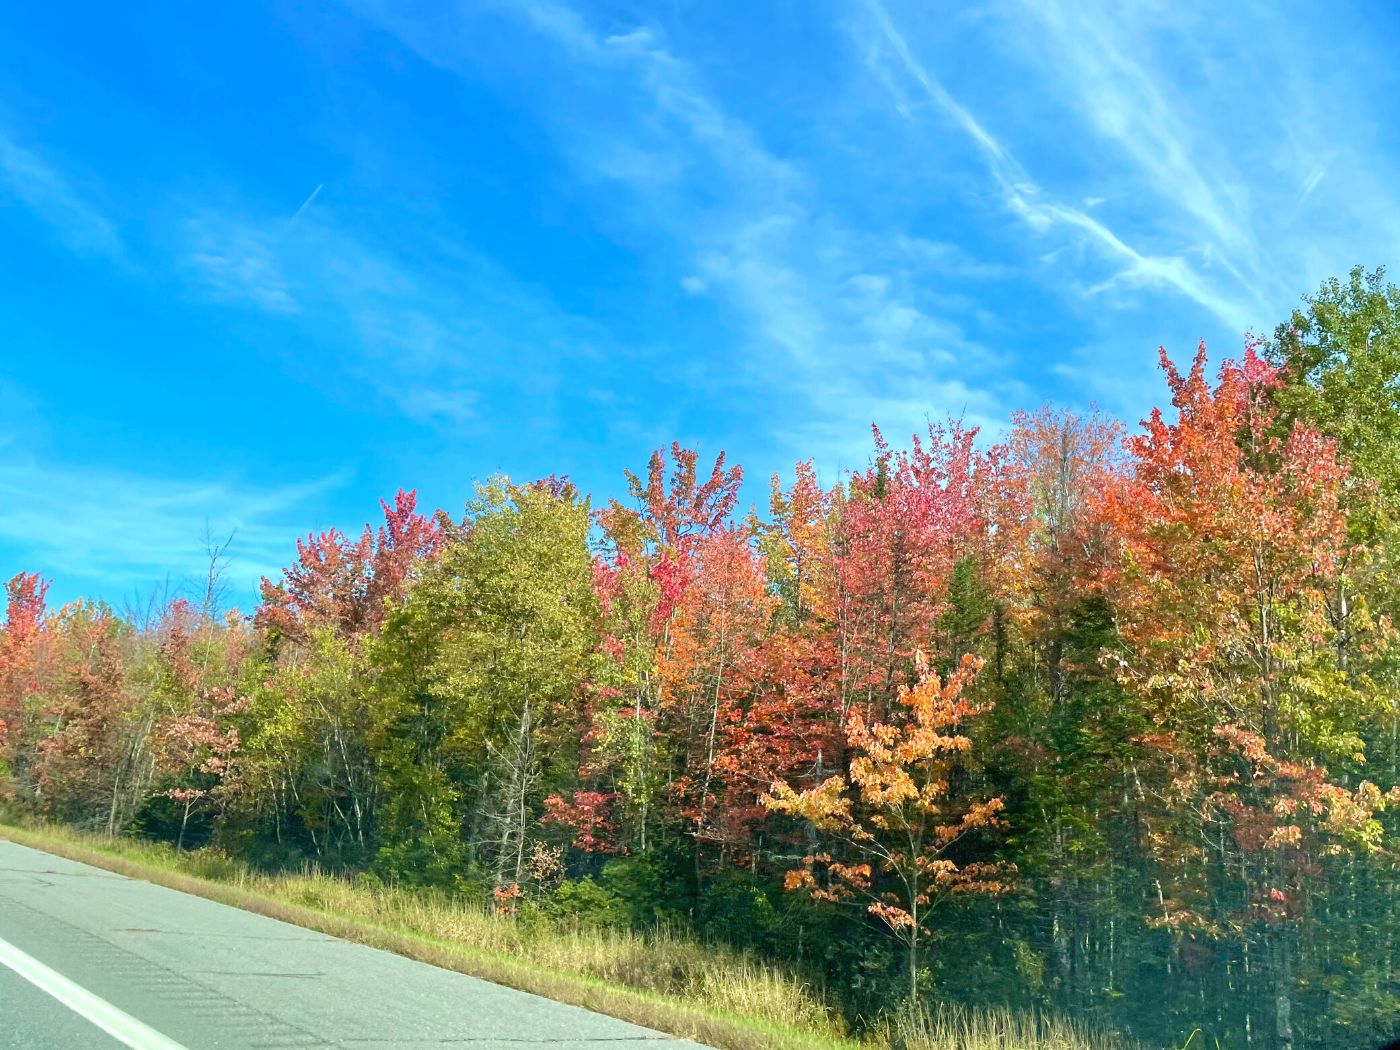 New England Fall Foliage borders a New Hampshire Highway